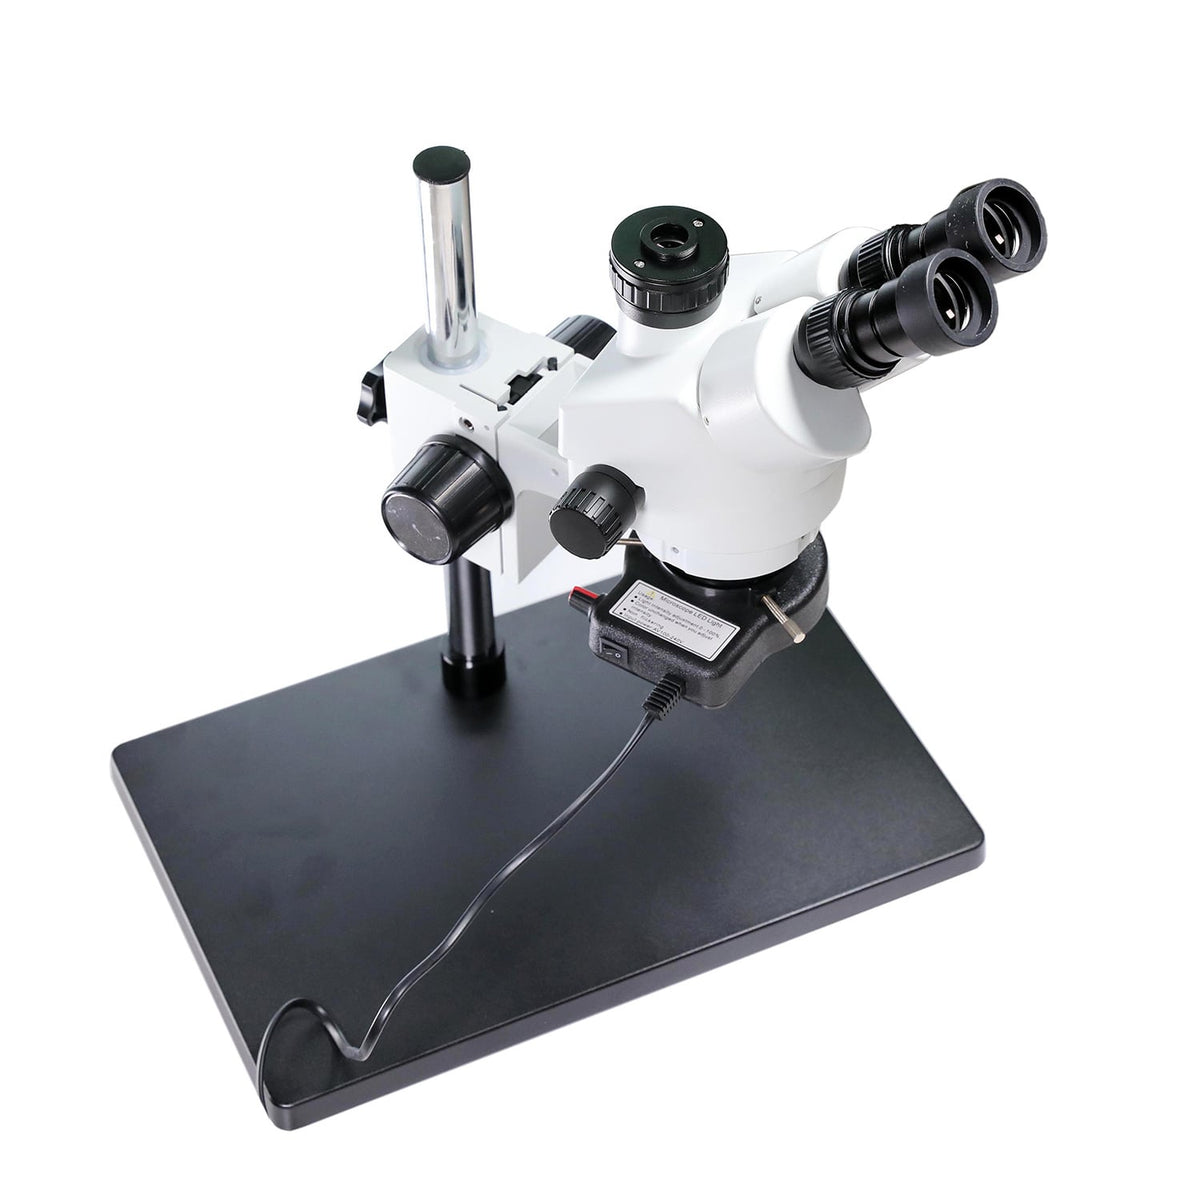 7-45X SZM45T-B1 TRINOCULAR INDUSTRIAL STEREO MICROSCOPE WITH LED LIGHTS